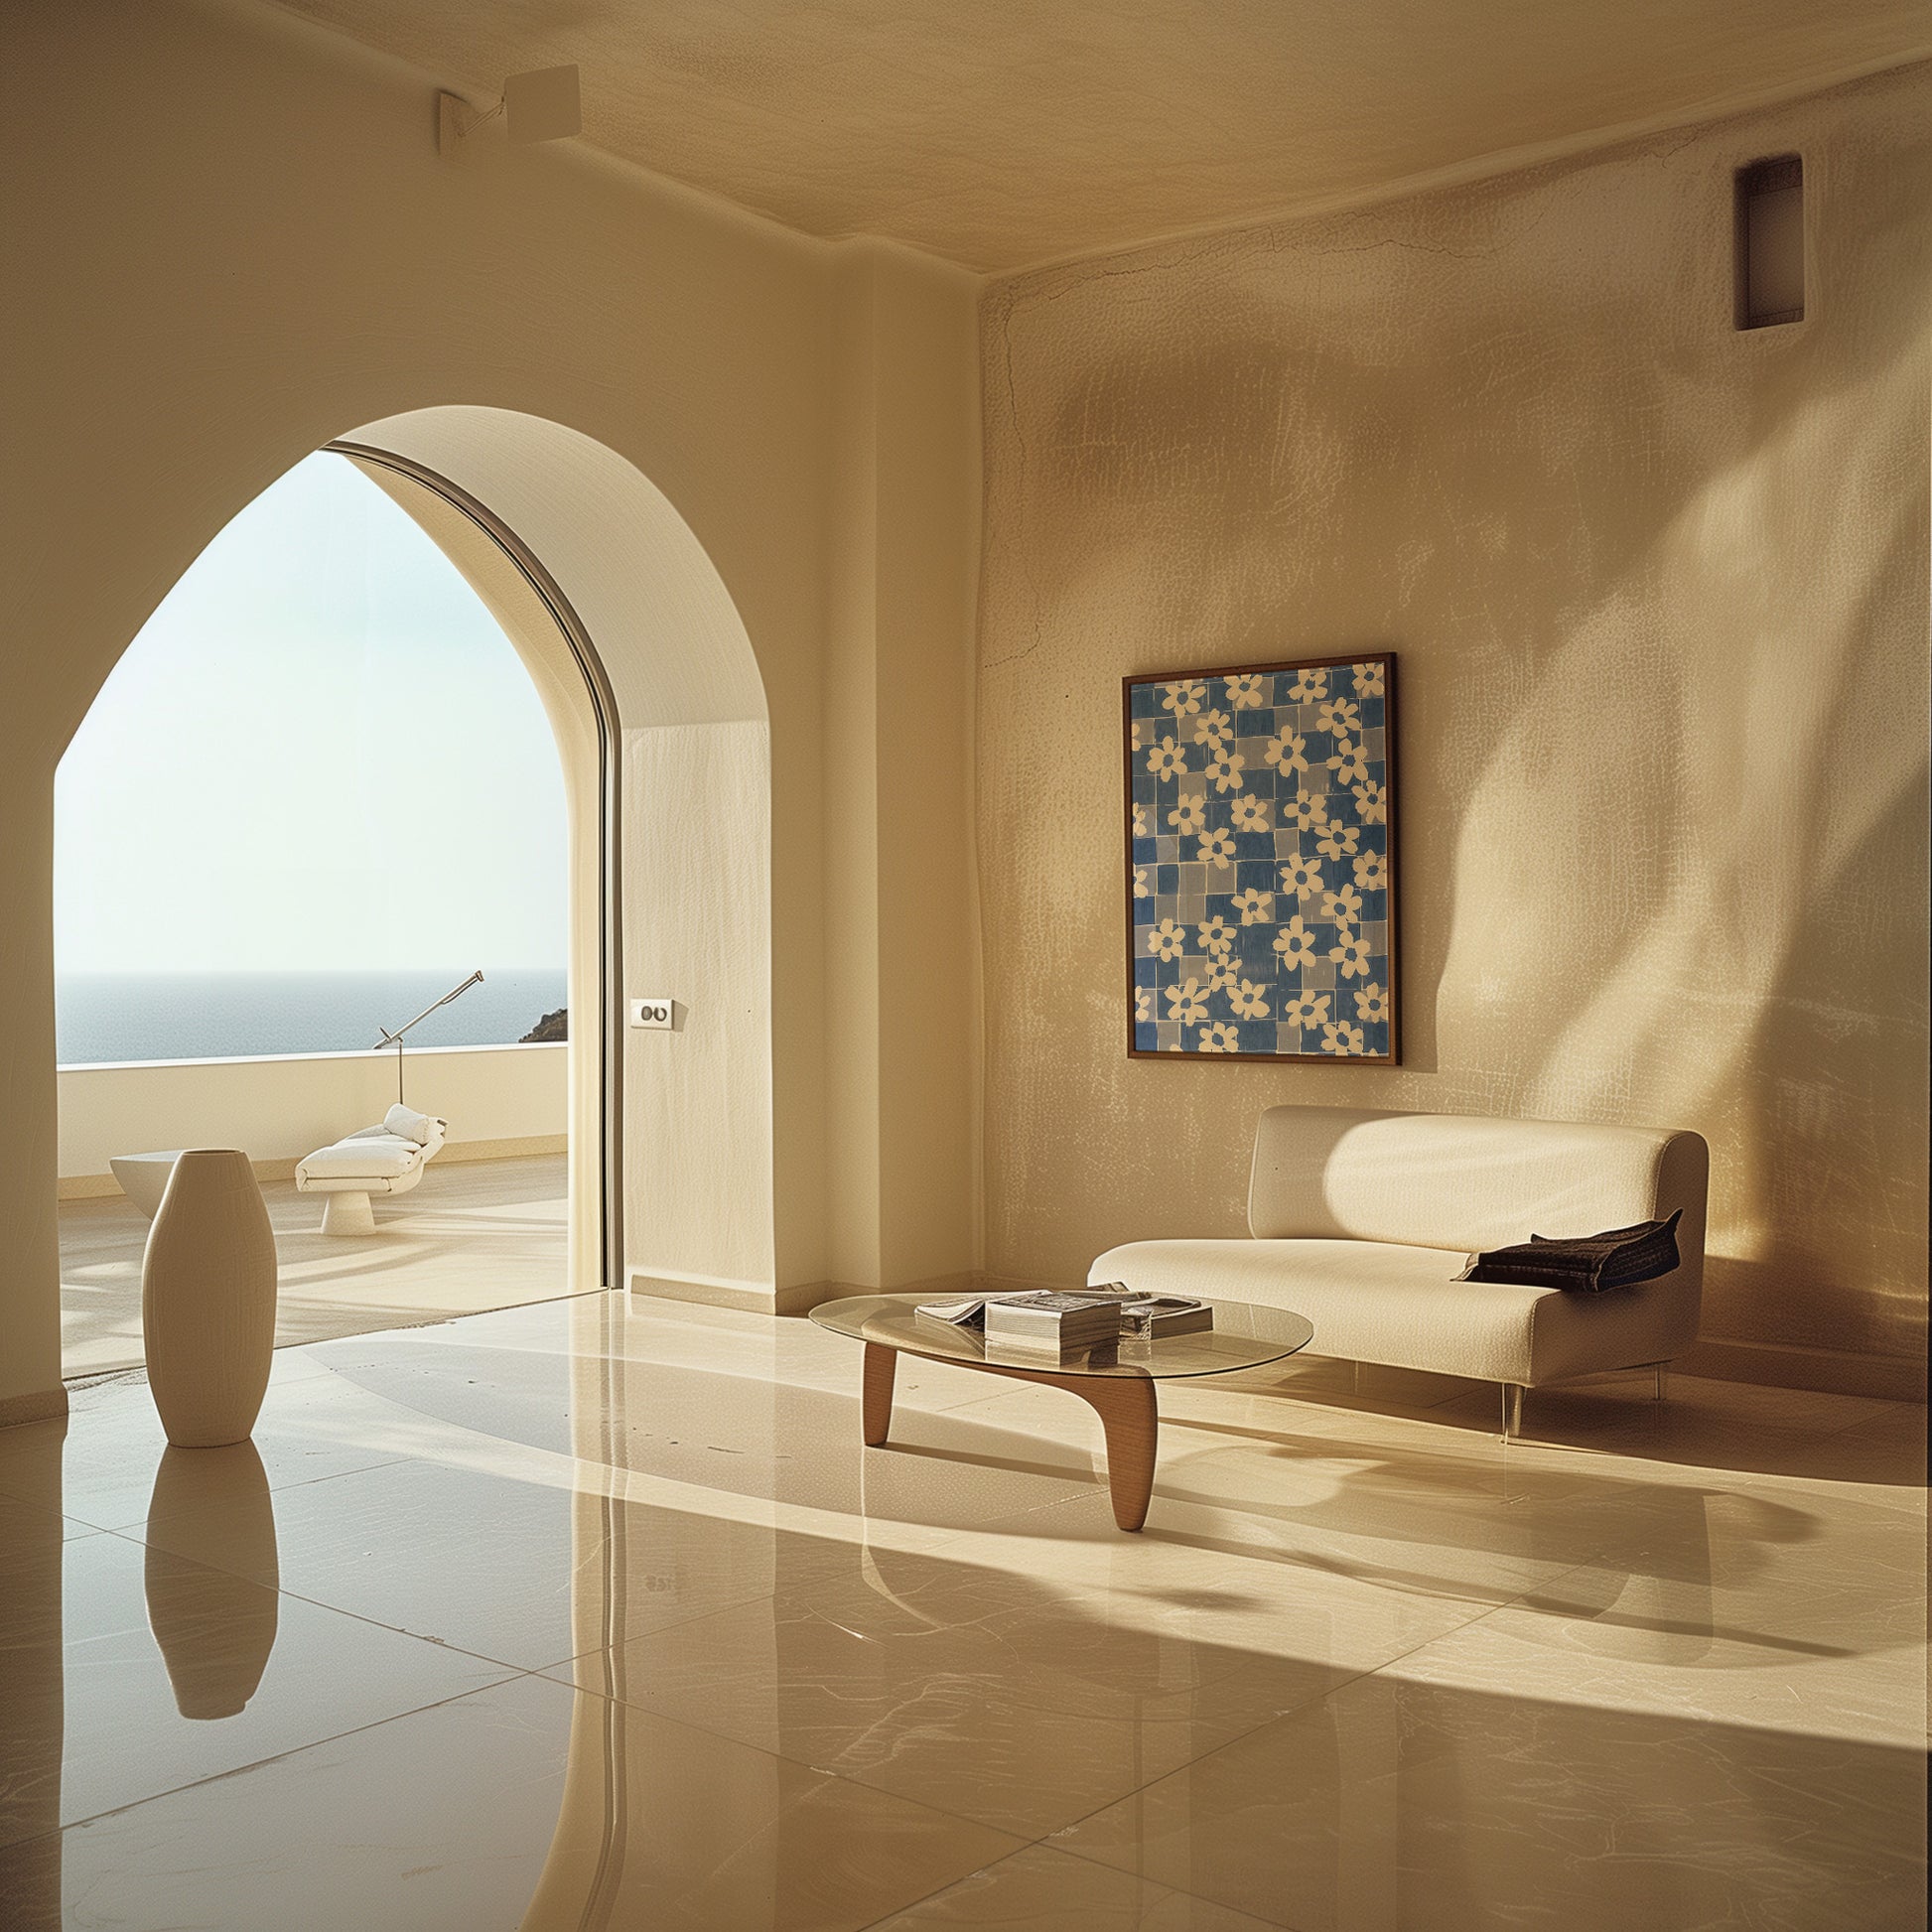 Bright, sunlit room with arch doorway, ocean view, modern furniture, and artwork on the wall.